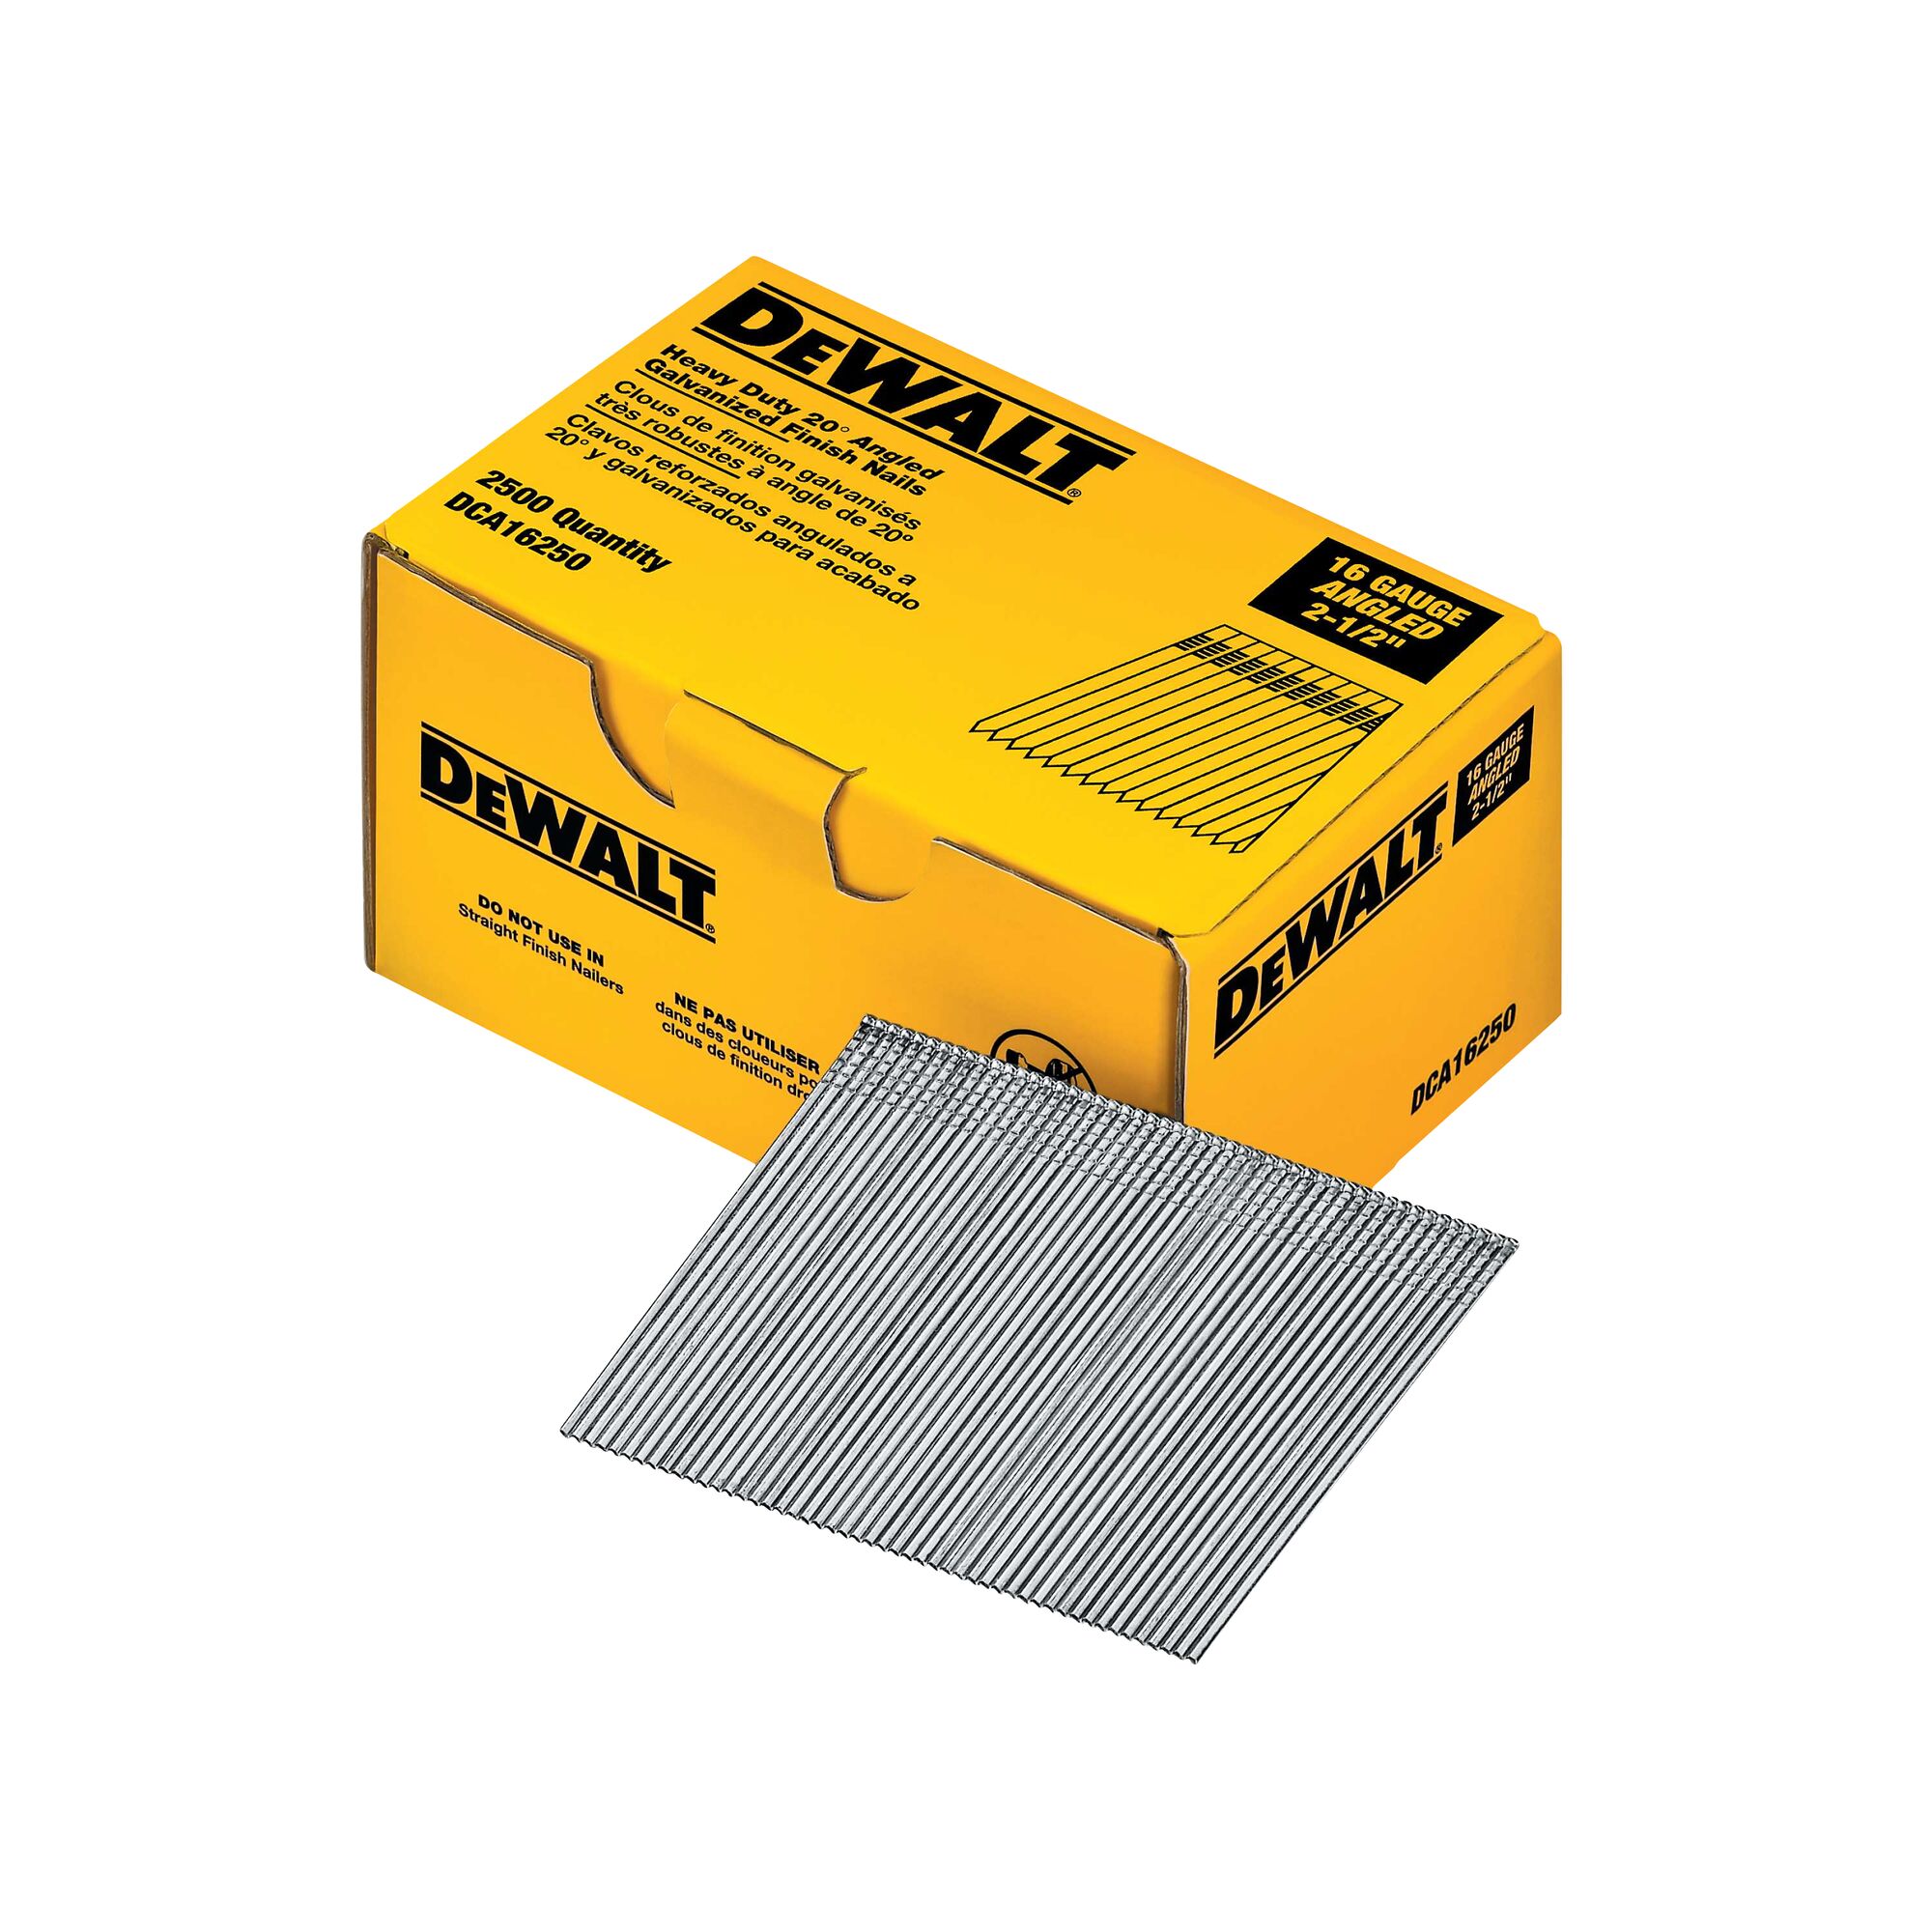 2000 x Mixed Angled  2nd Fix Nails DEWALT DC618KB & DCN660 500 each size 